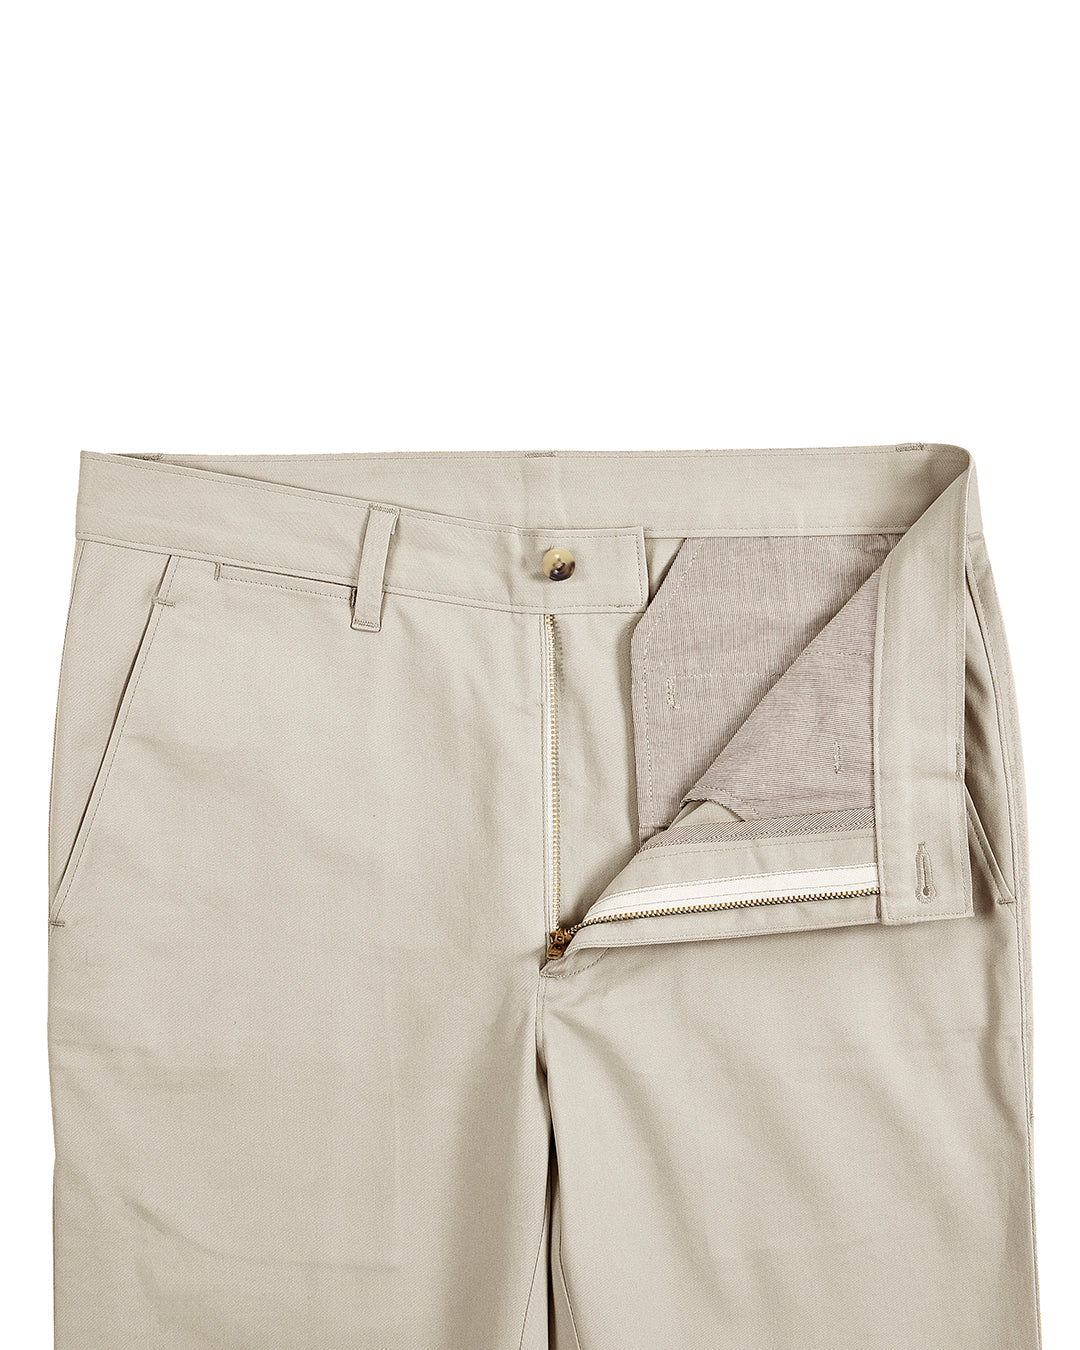 Front open view of custom Genoa Chino pants for men by Luxire in light beige